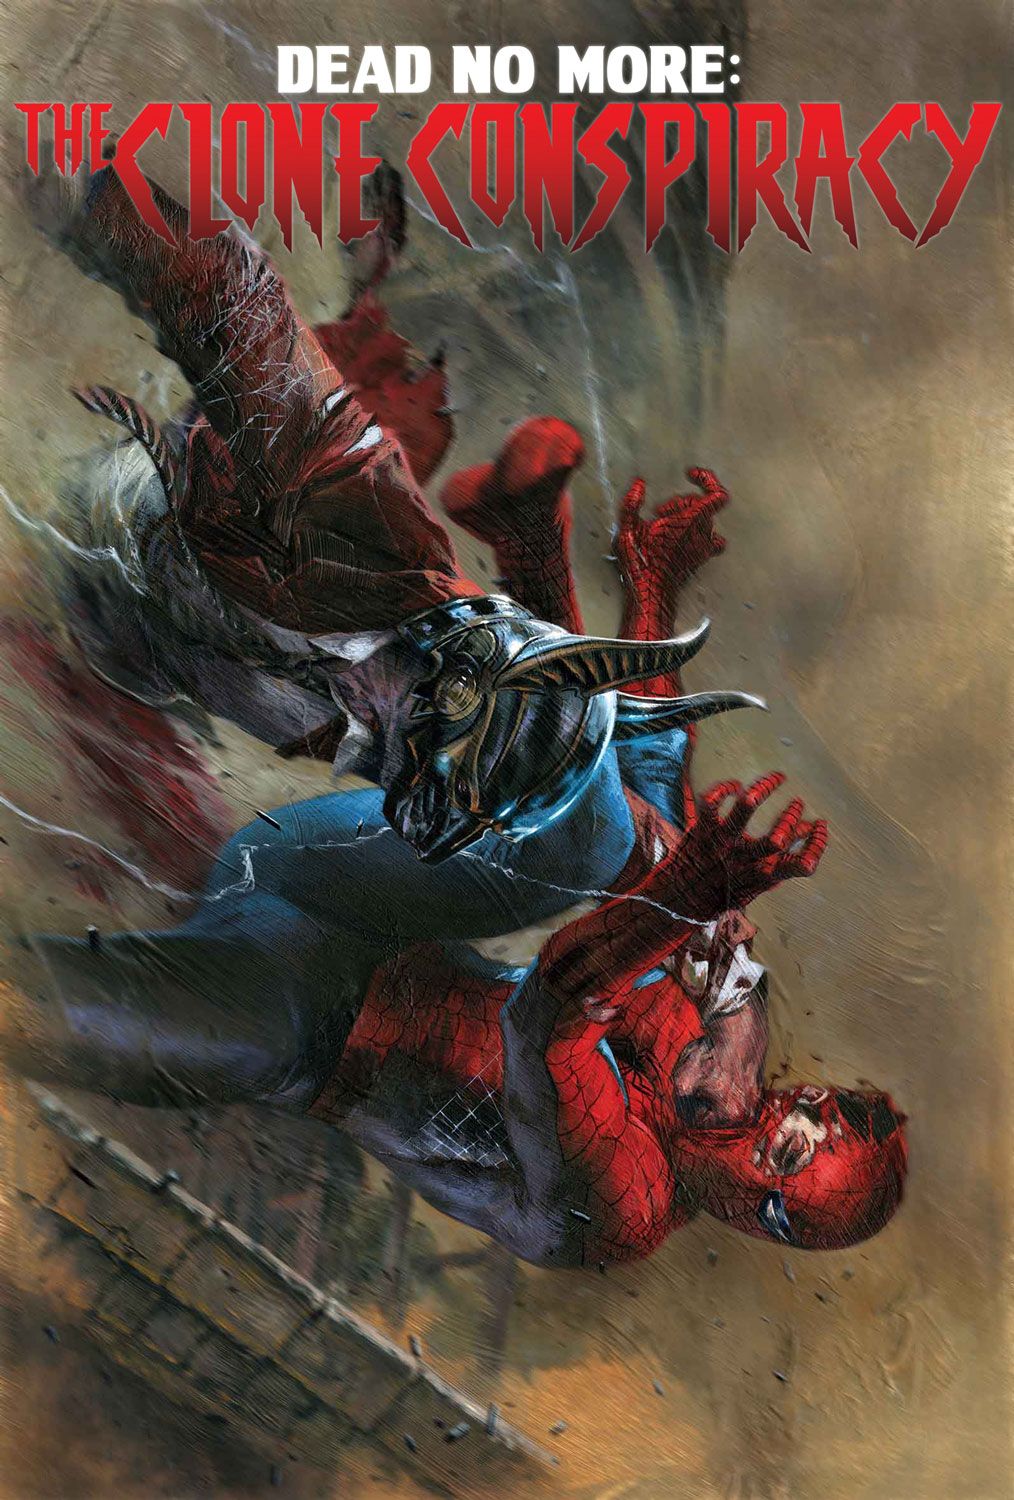 The Clone Conspiracy #3 cover by Gabriele Dell’Otto